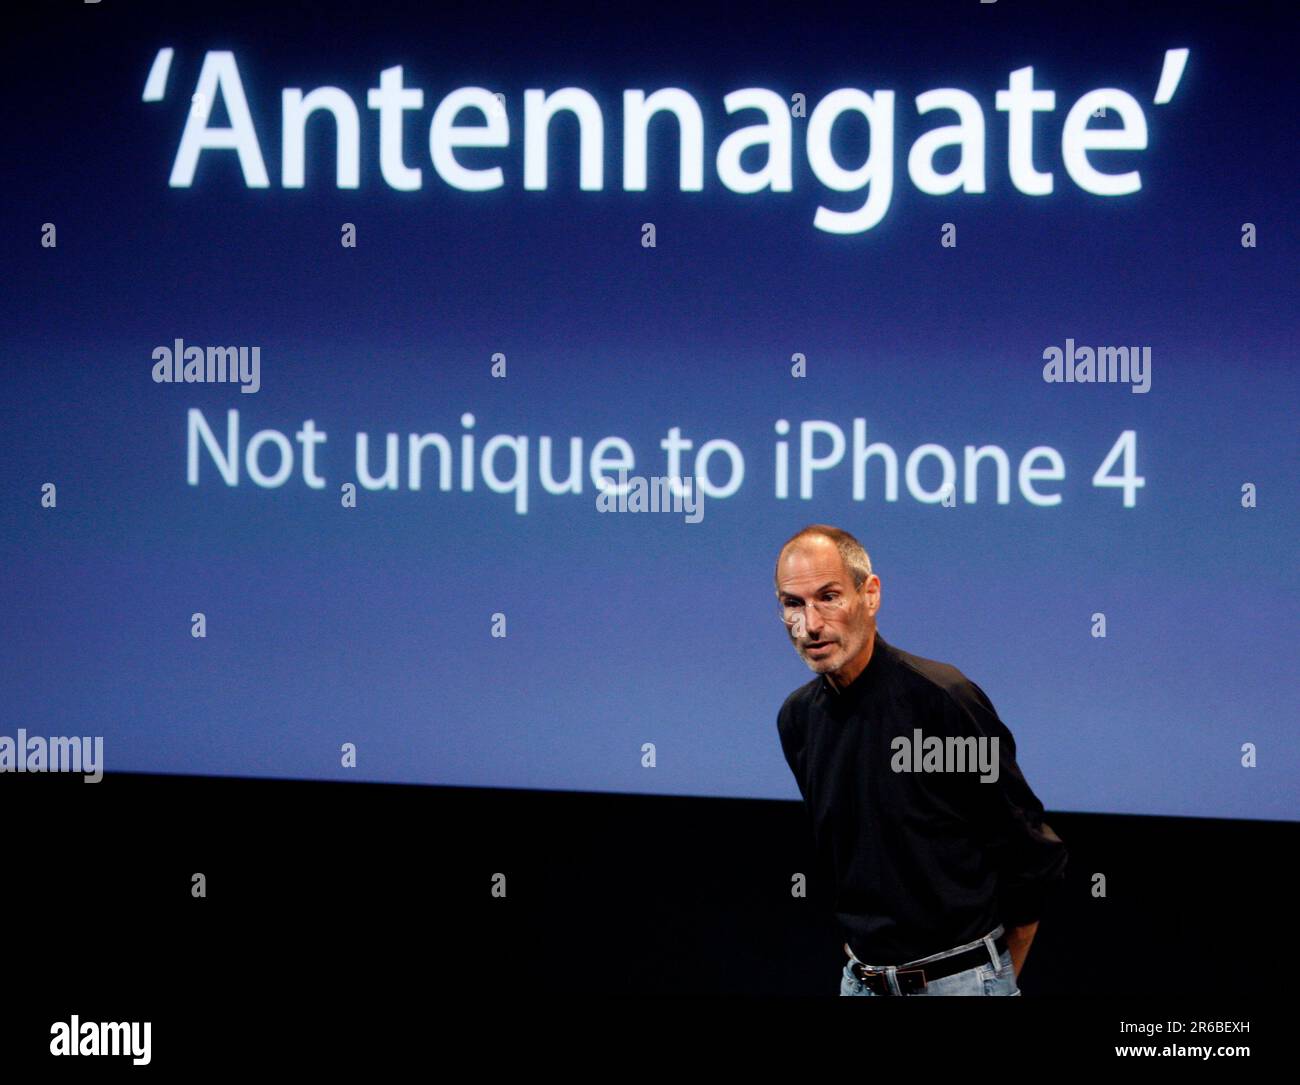 Apple CEO Steve Jobs appears at a news conference to address problems  encountered with the iPhone 4 antenna at Apple headquarters in Cupertino,  Calif., on Friday, July 16, 2010. Jobs jokingly referred